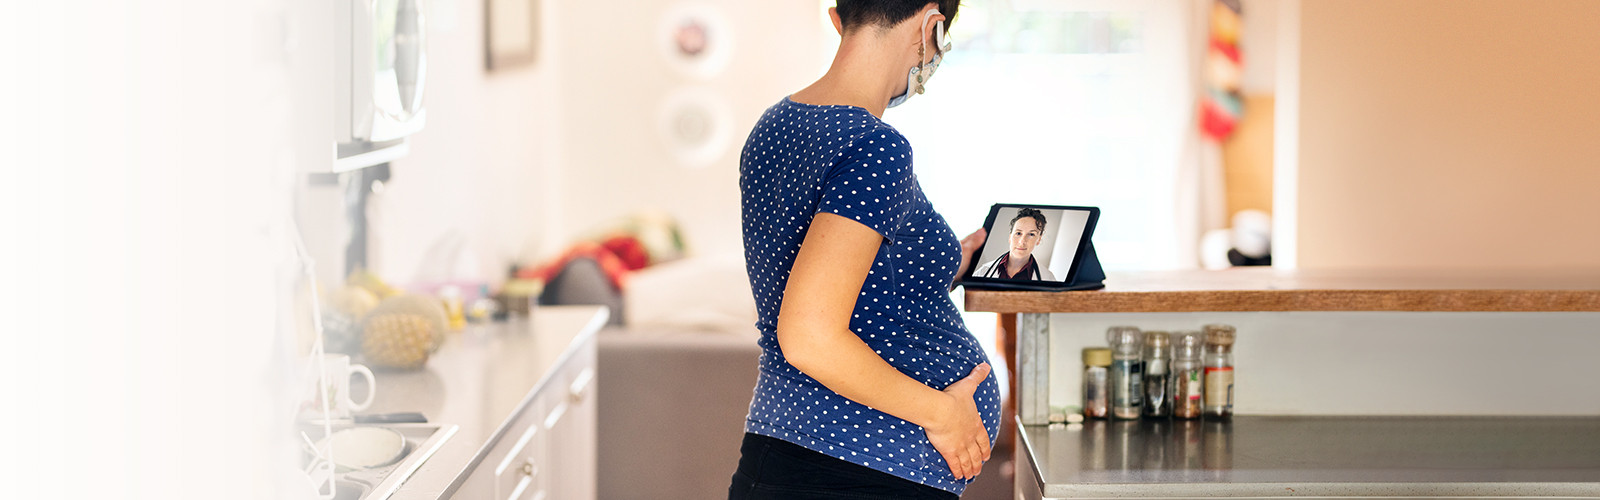 pregnant woman consulting doctor on a tablet